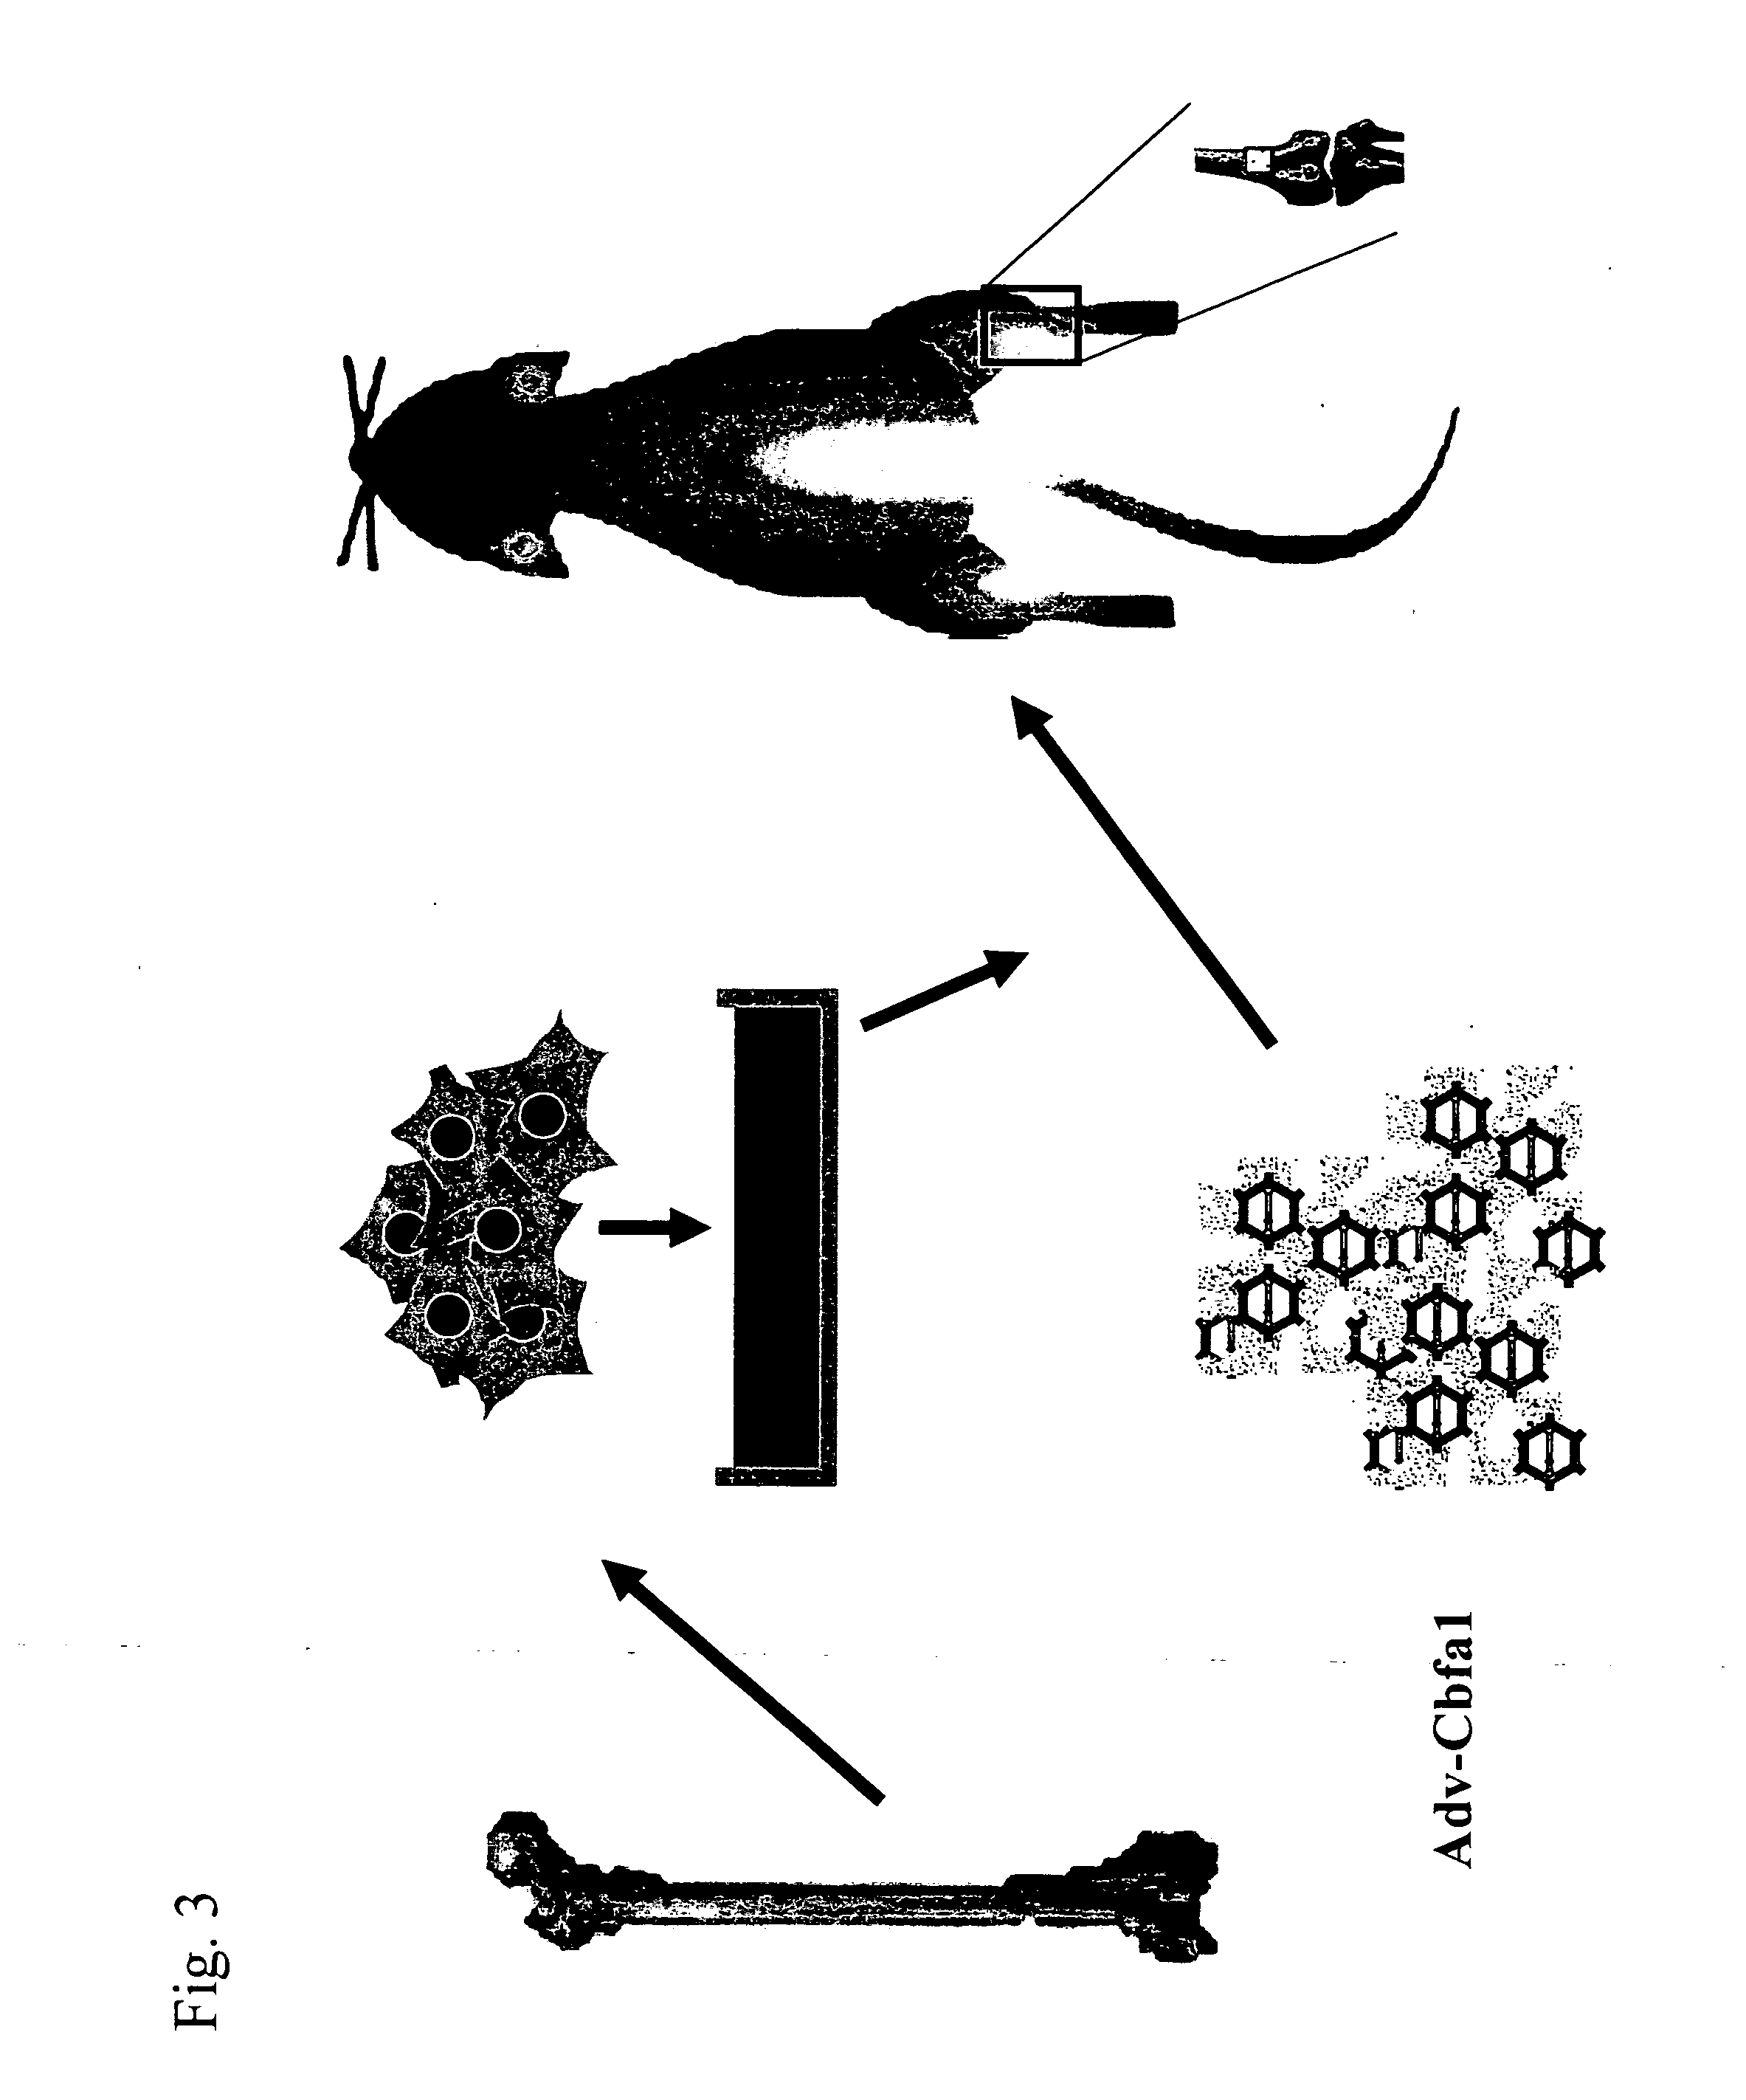 Implant for regenerating bone or cartilage with the use of transcriptional factor